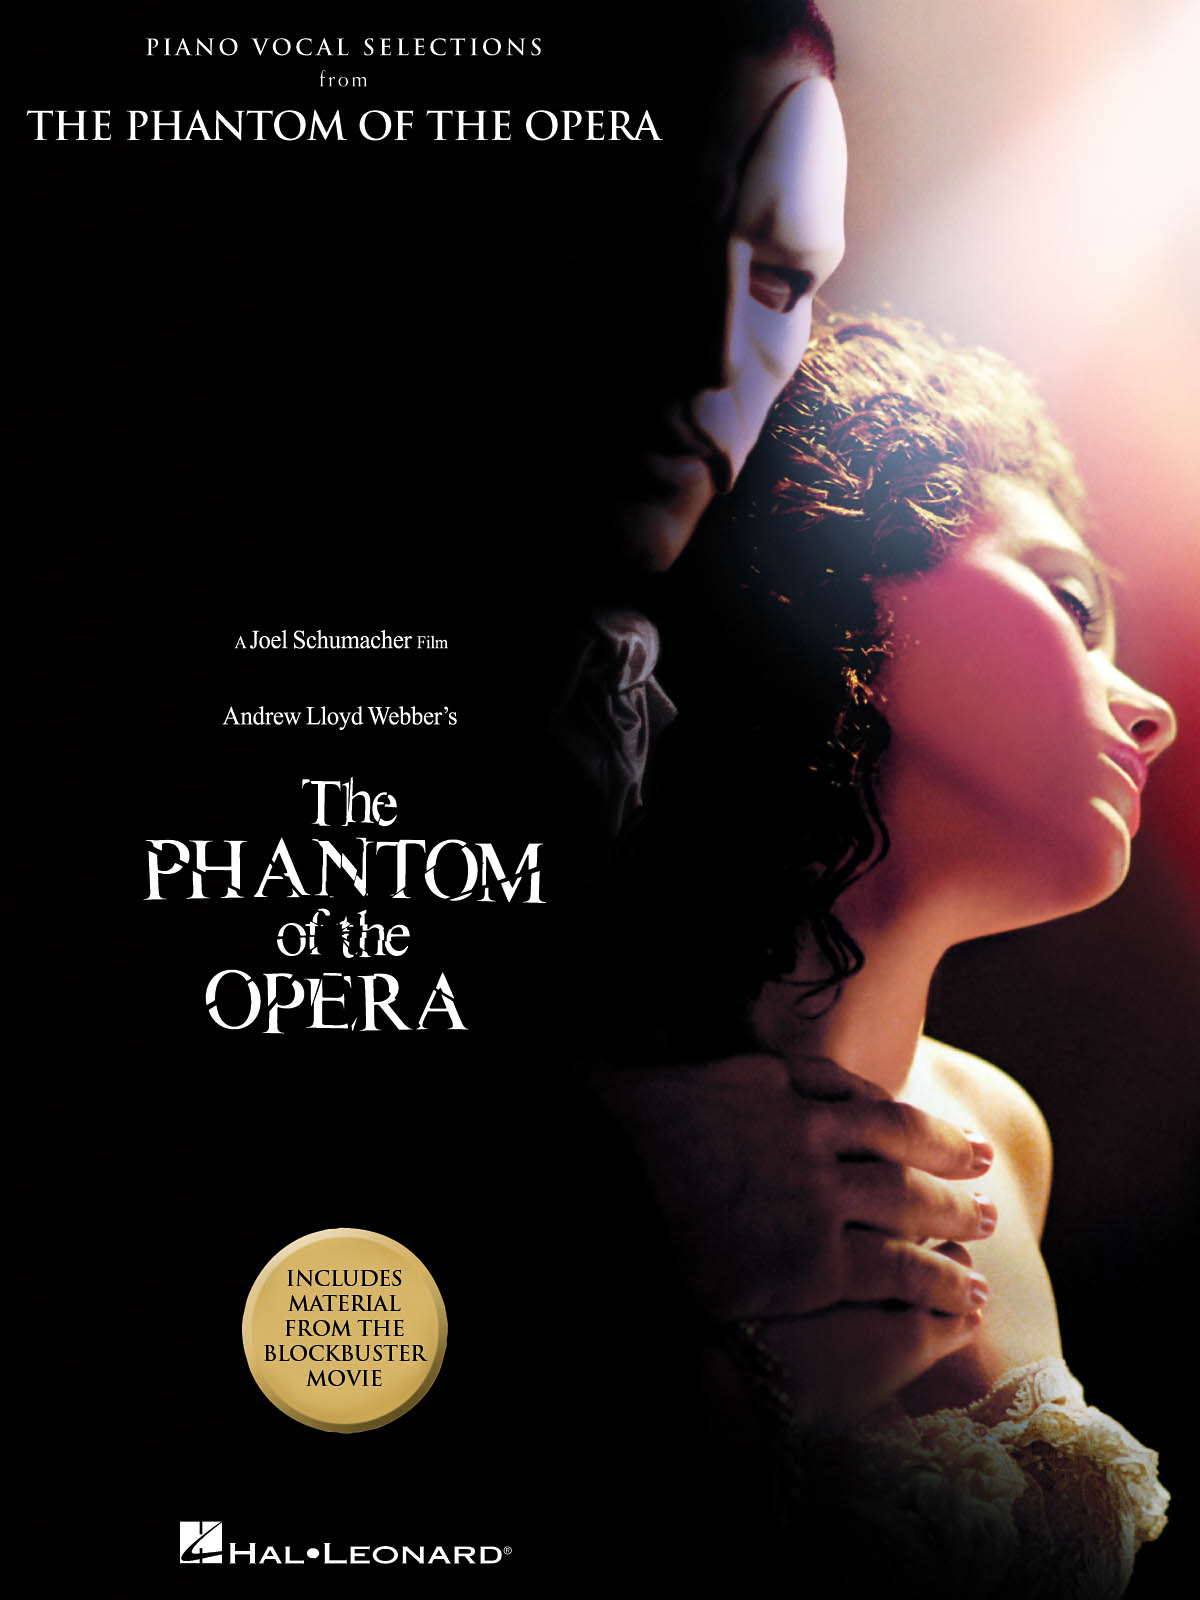 The Phantom Of The Opera - Movie Selections - Piano Vocal Selections including Material from the Blockbuster Movie